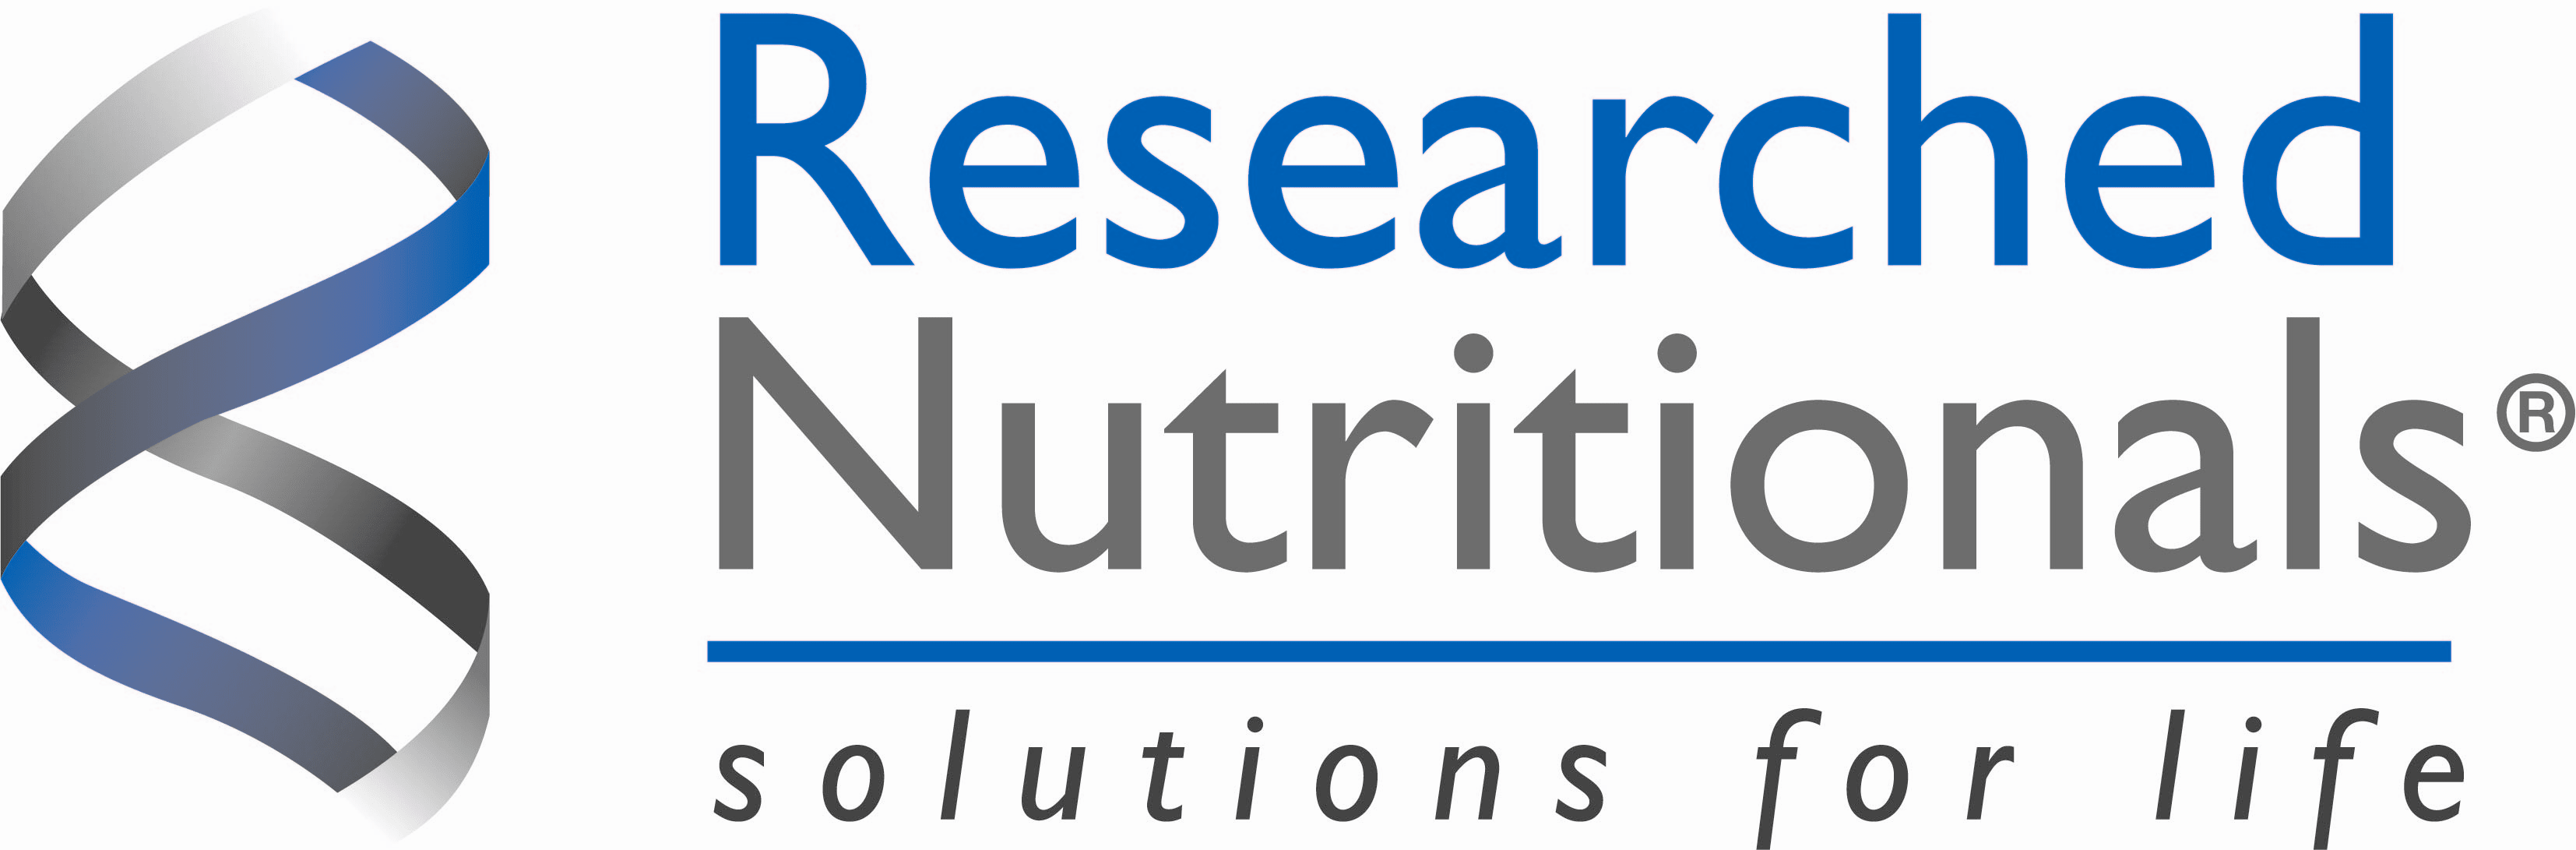 Copy of Researched Nutritionals Logo